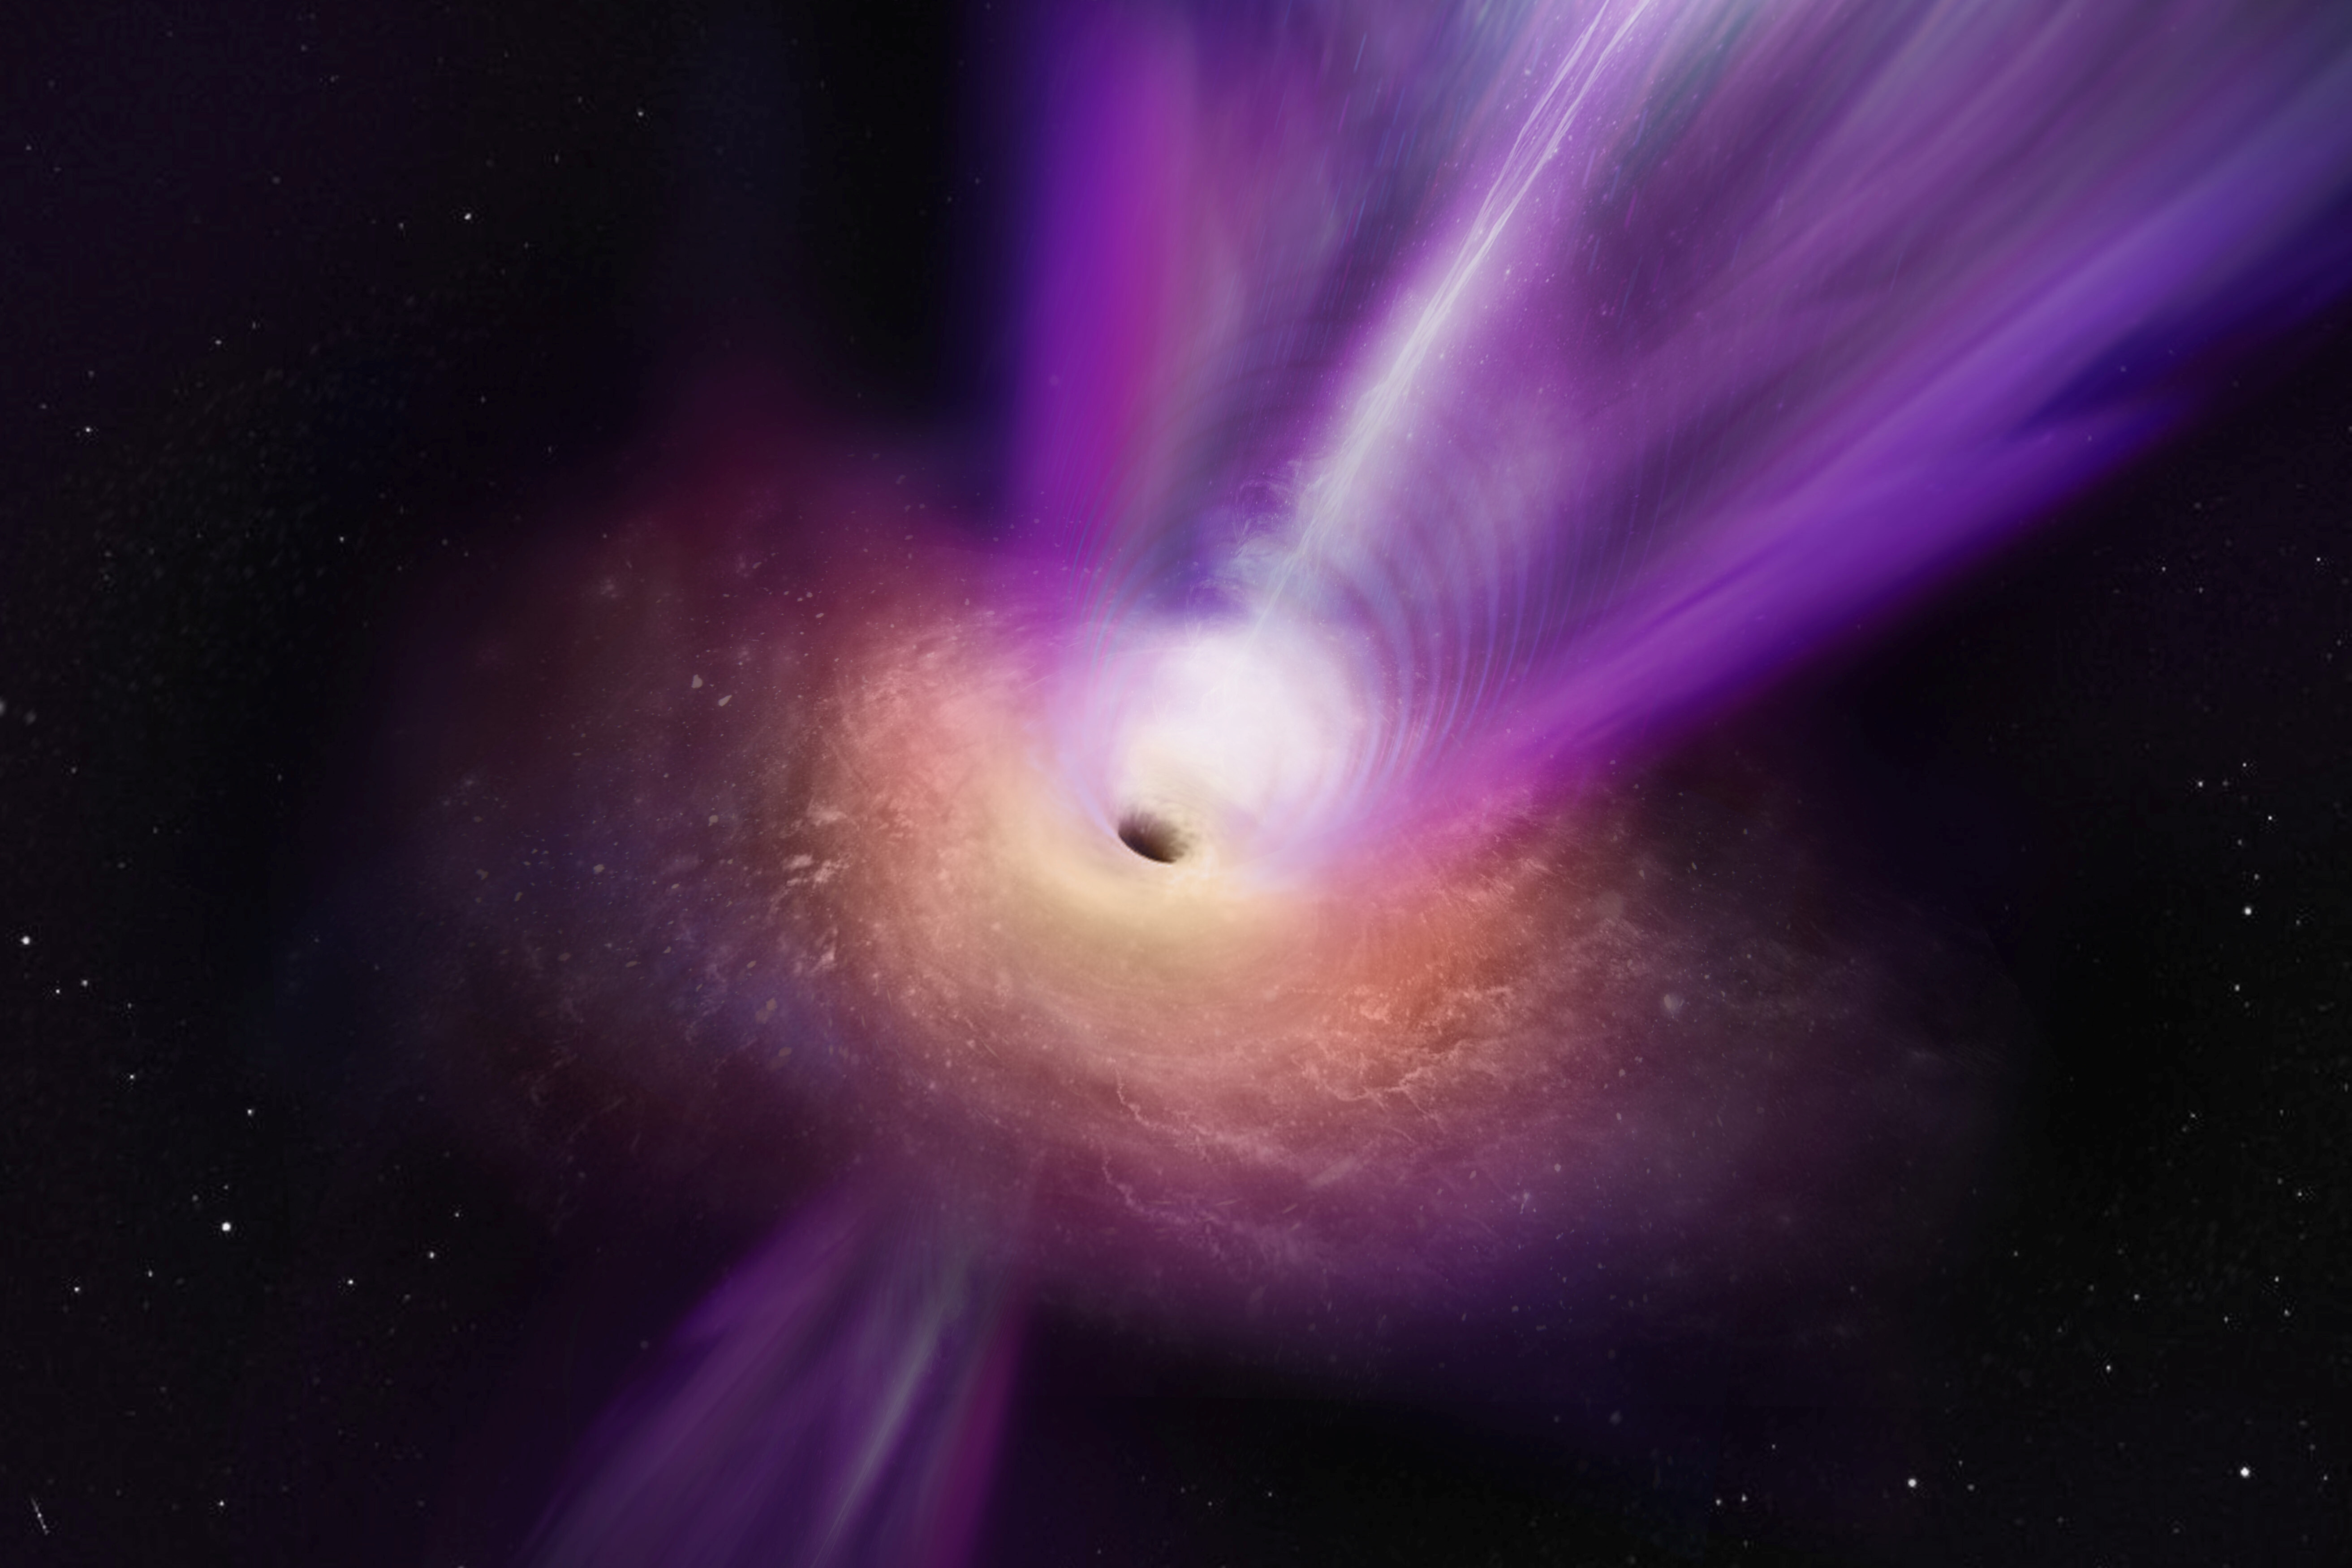 Scientists observing the compact radio core of galaxy M87 have discovered new details about the galaxy’s supermassive black hole. In this artist’s conception, the black hole’s massive jet is seen rising up from the center of the black hole. The observations on which this illustration is based represent the first time that the jet and the black hole shadow have been imaged together, giving scientists new insights into how black holes can launch these powerful jets. Photo: Reuters